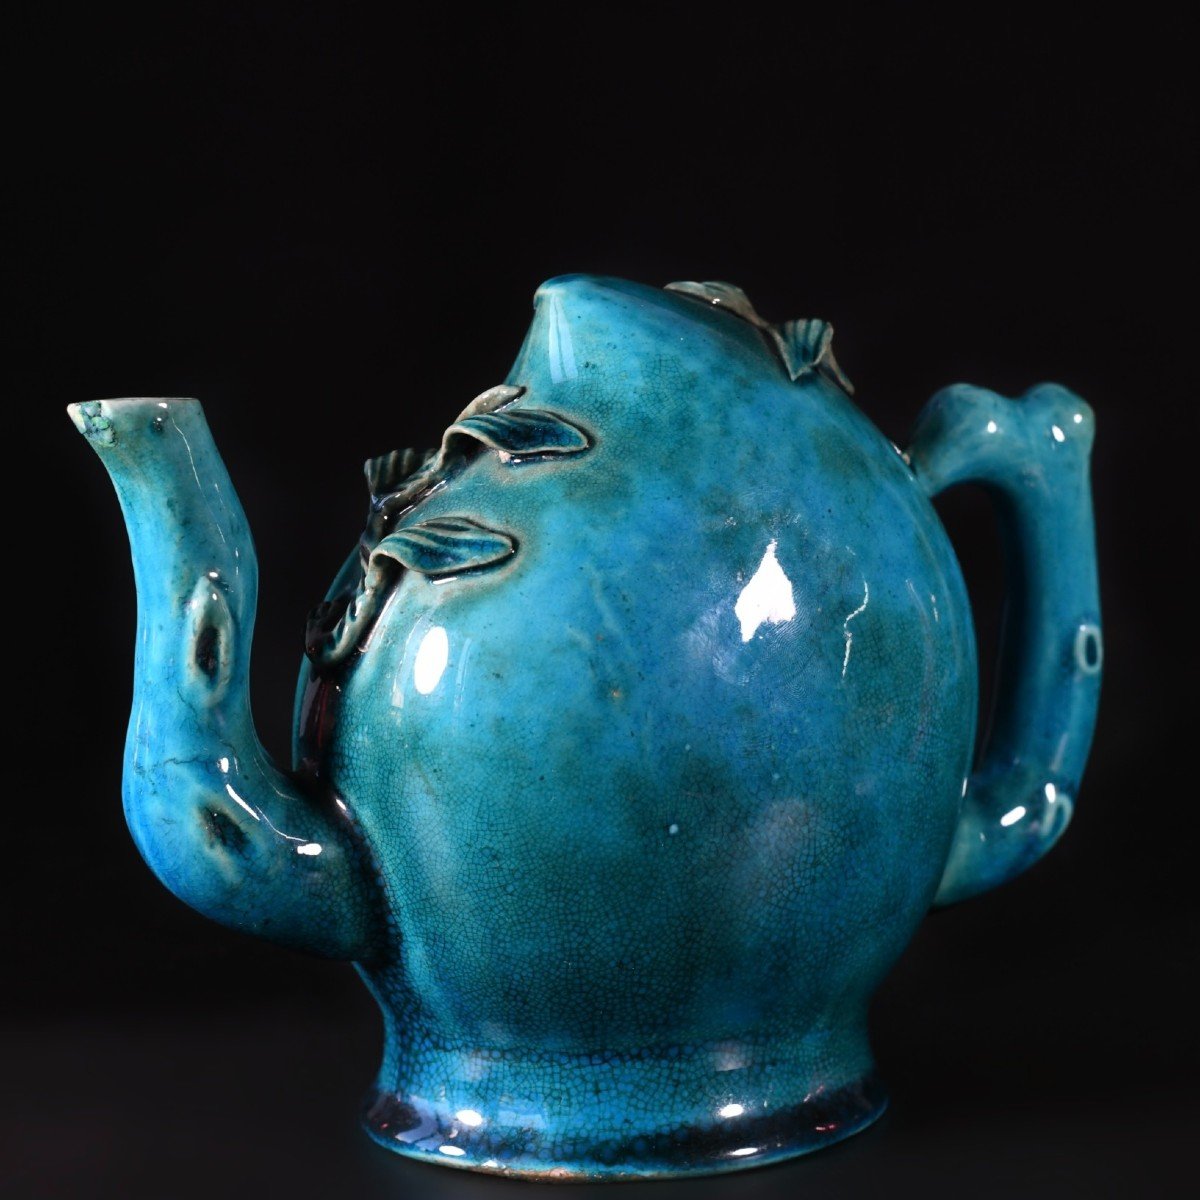 Porcelain Teapot Called "cadogan" With Turquoise Glaze - China 18th Century-photo-7